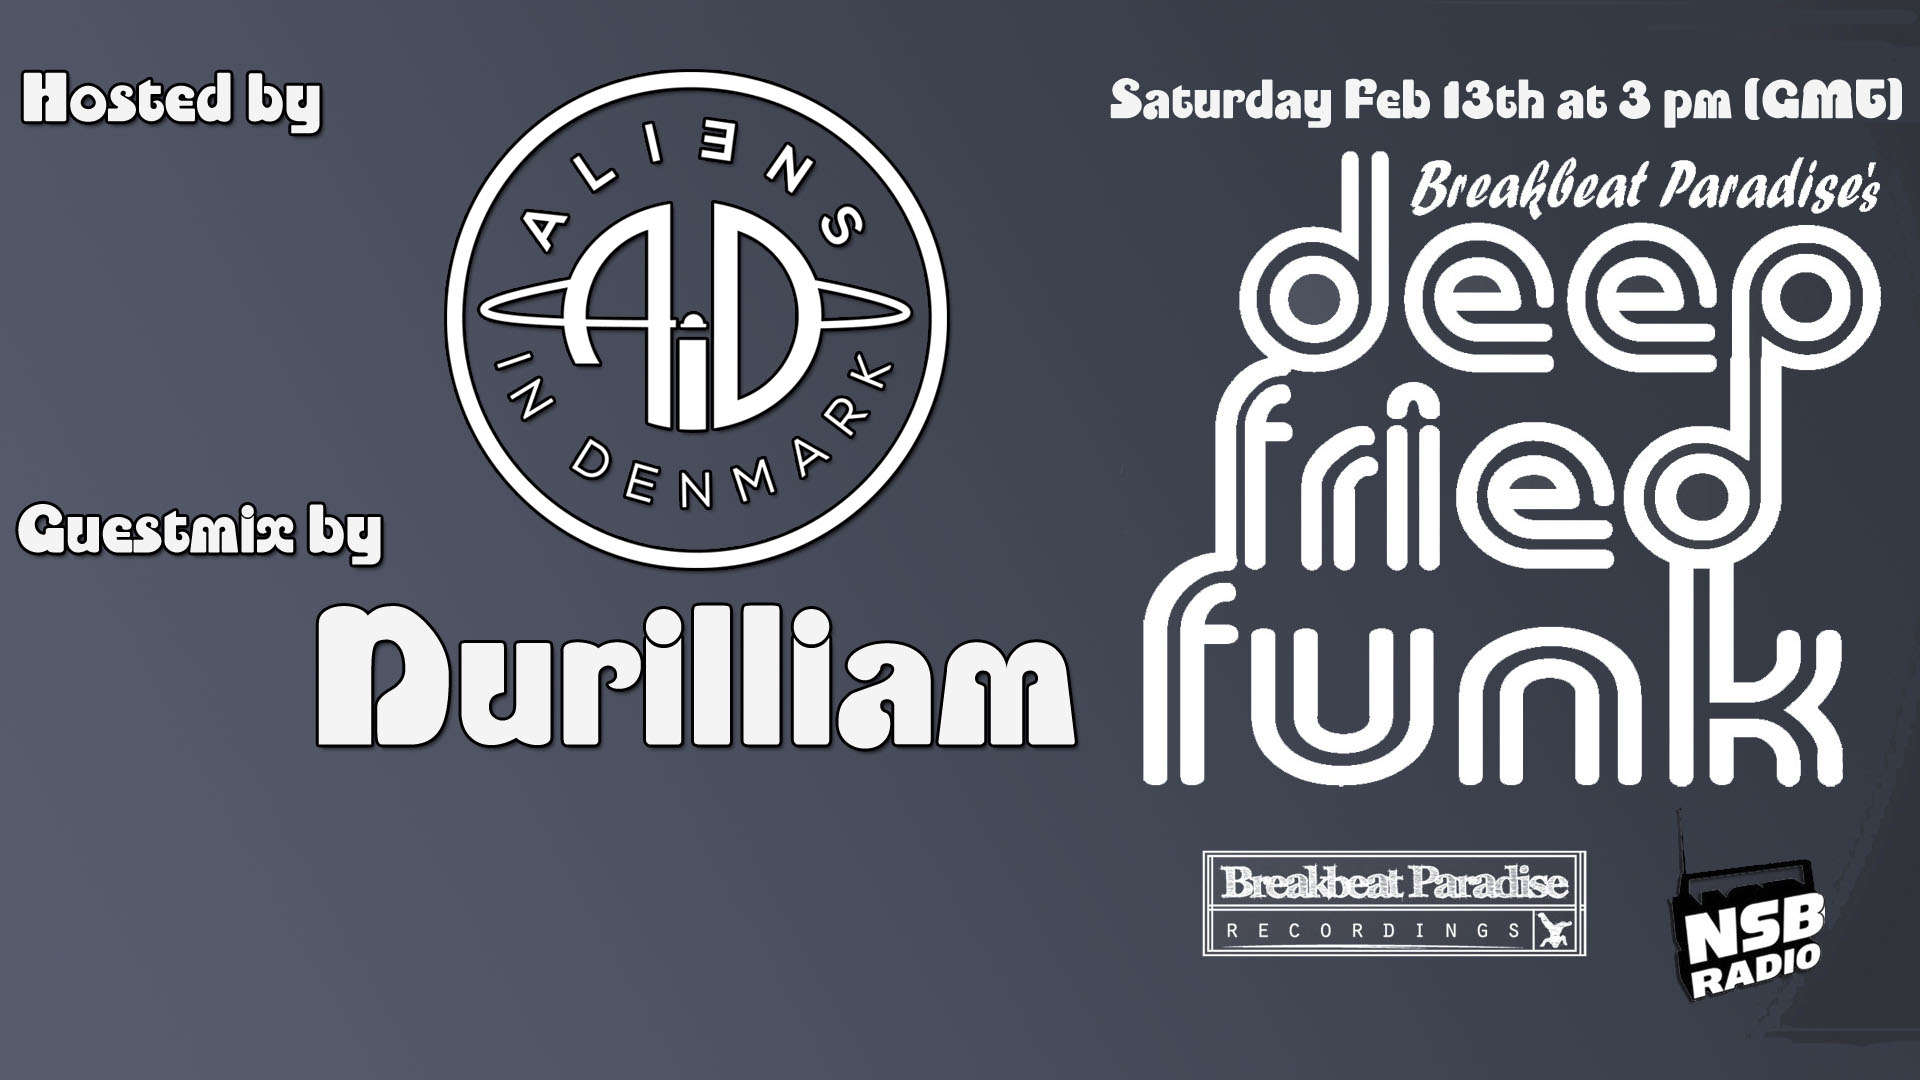 Deep Fried Funk #3 – Hosted by Aliens In Denmark – Guestmix by Durillium